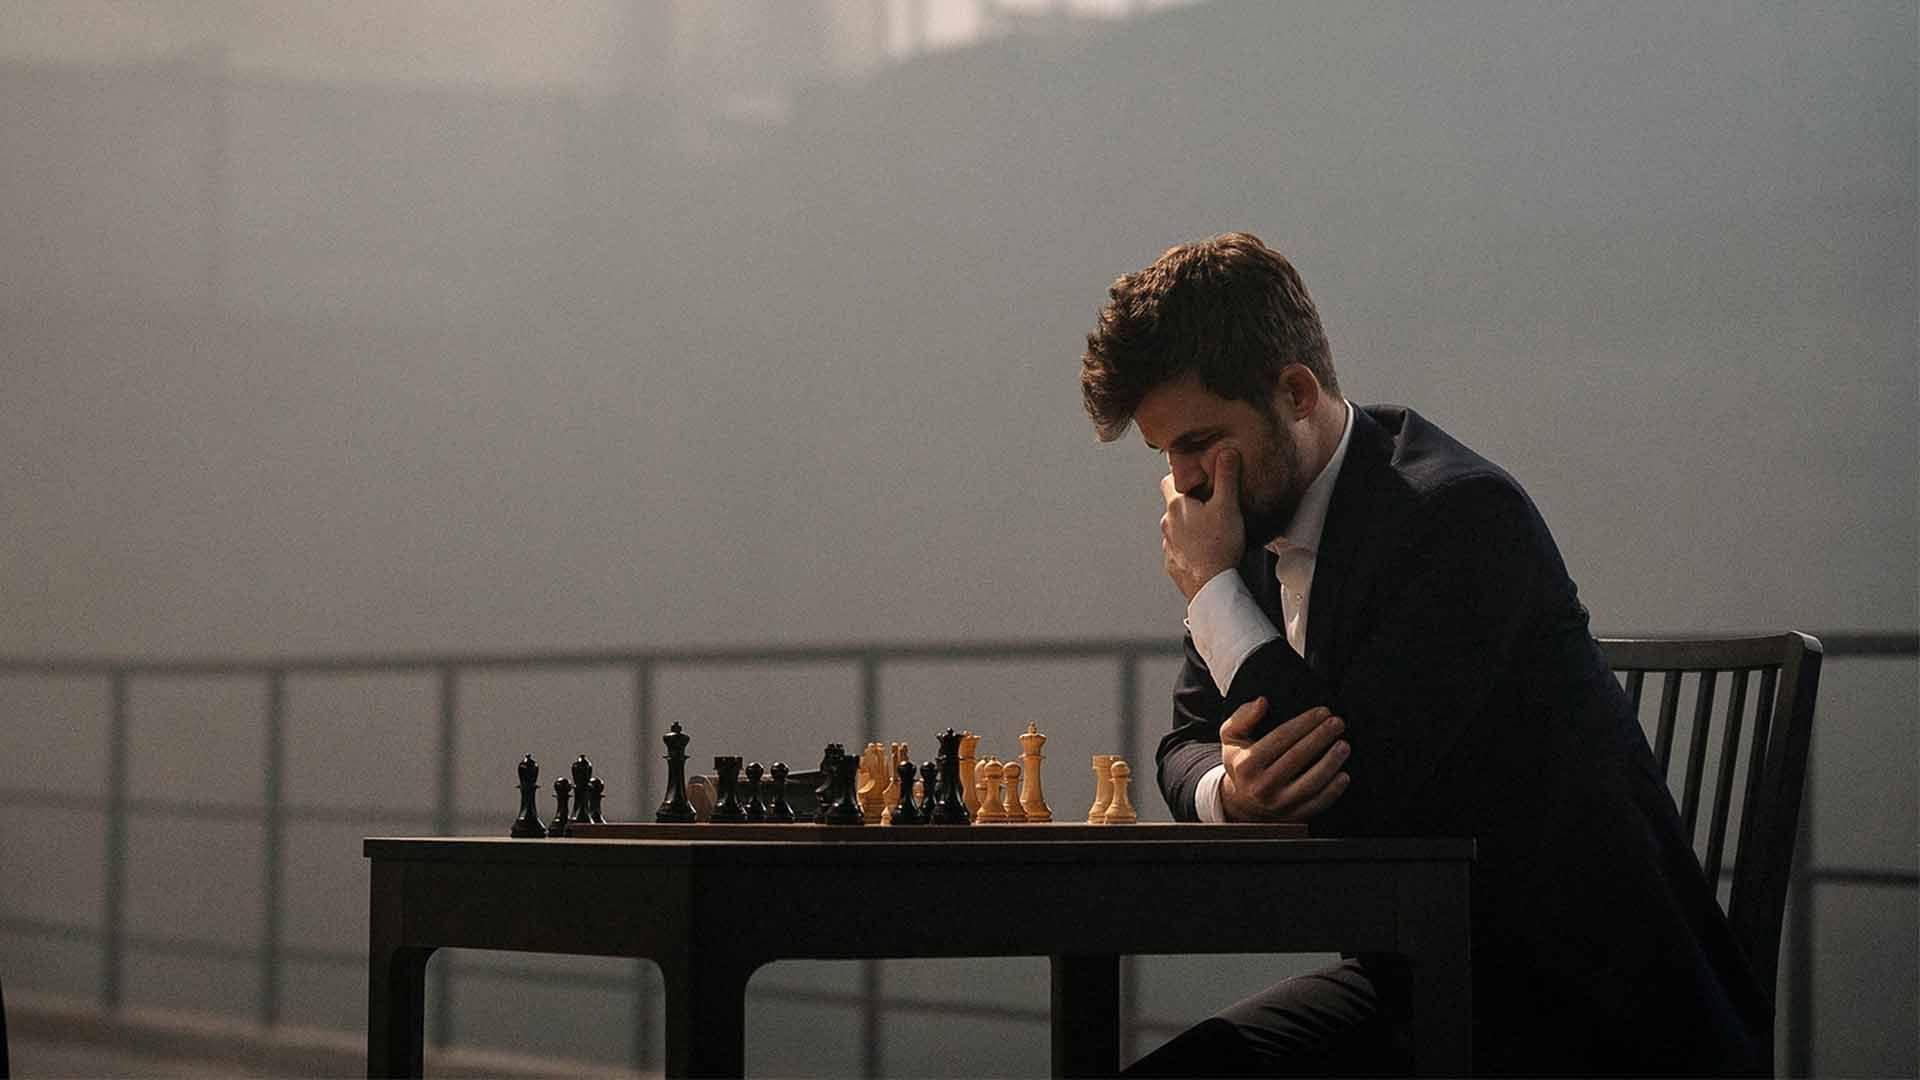 Chess Master Live Wallpaper - free download